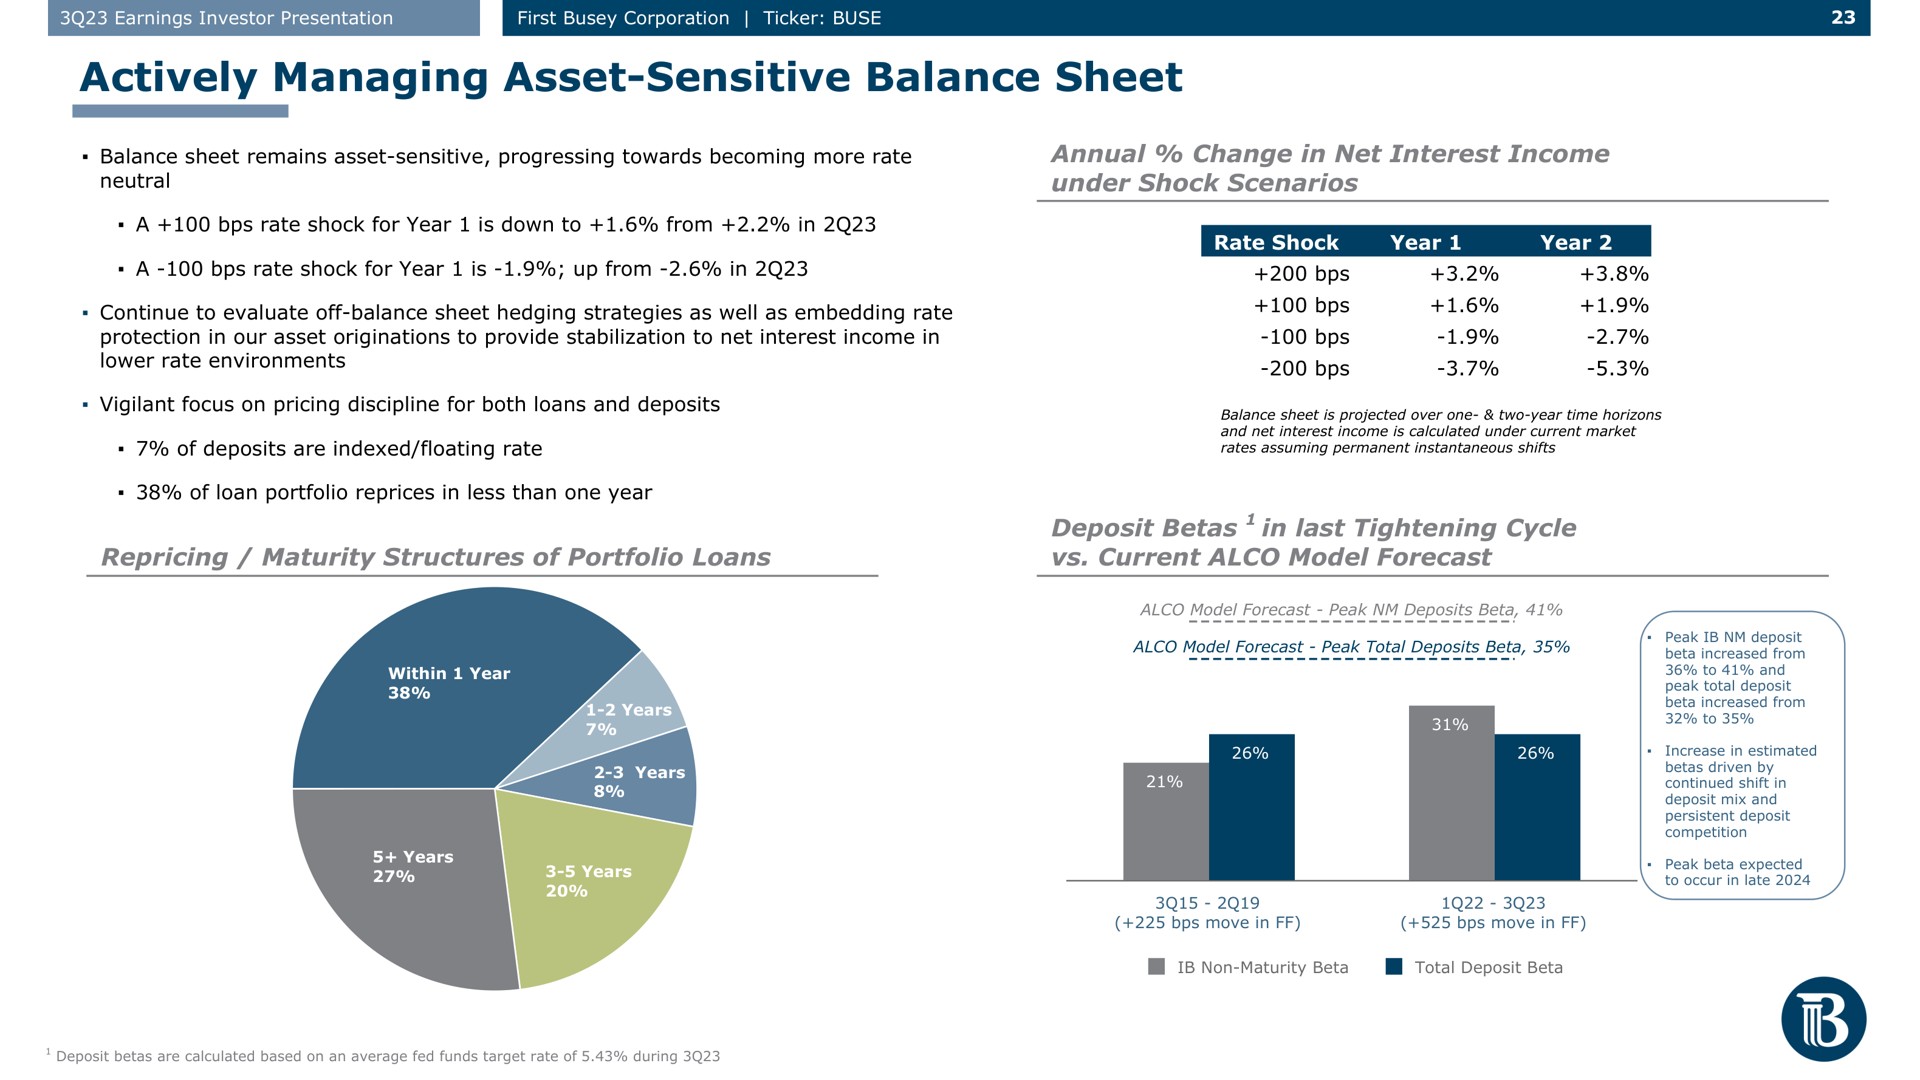 actively managing asset sensitive balance sheet annual change in net interest income under shock scenarios maturity structures of portfolio loans deposit betas in last tightening cycle current alco model forecast | First Busey